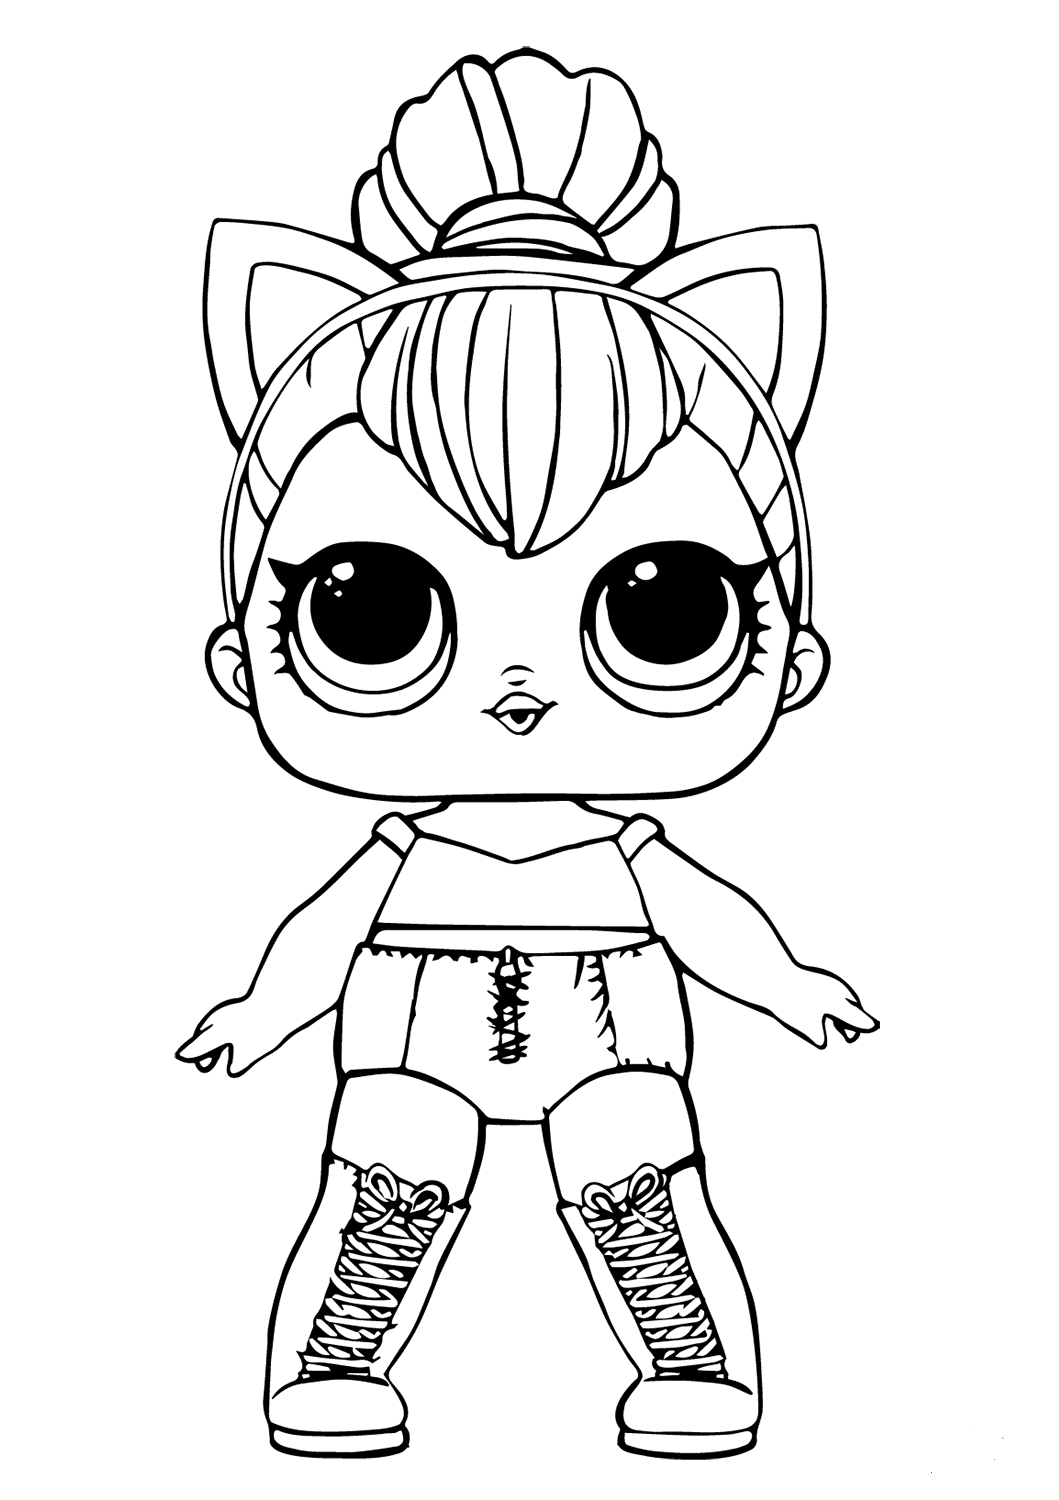 lol-doll-coloring-pages-kitty-queen-6449f6b9d81a6e5b591be7bb2a375f89-qOpzBU Lol Doll Coloring Pages Kitty Queen